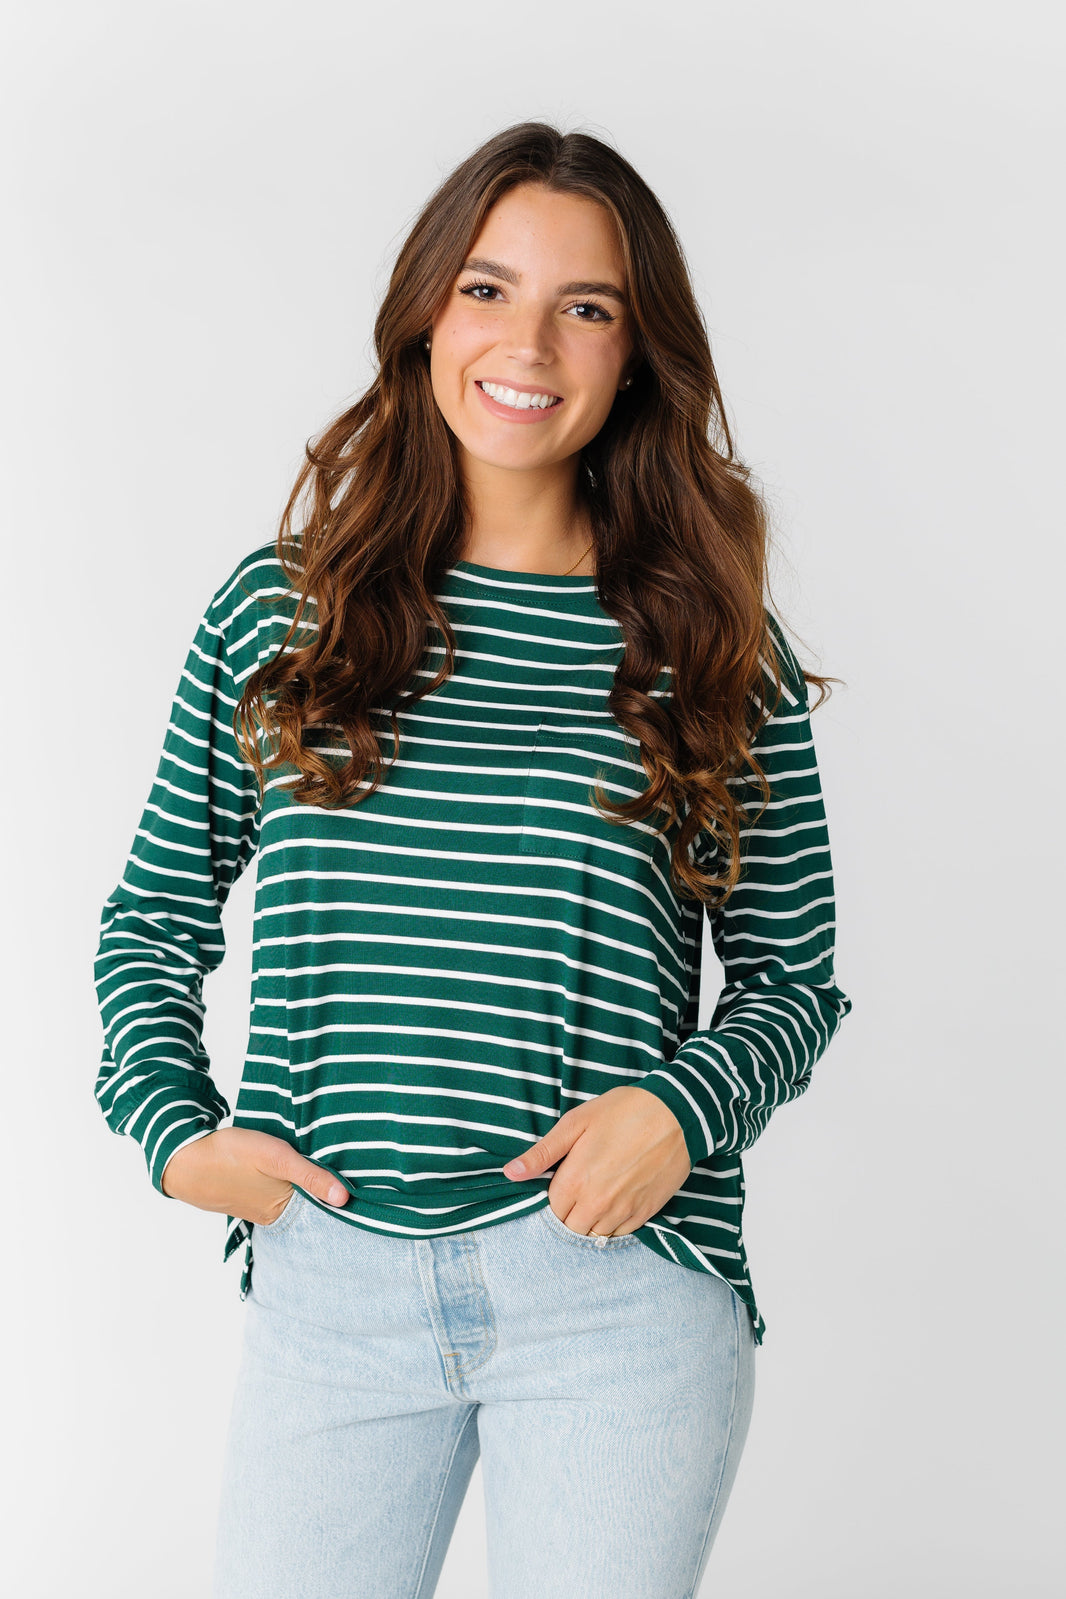 Fashionable Women's Tops & Shirts - Shop Today At Called to Surf – Page 3